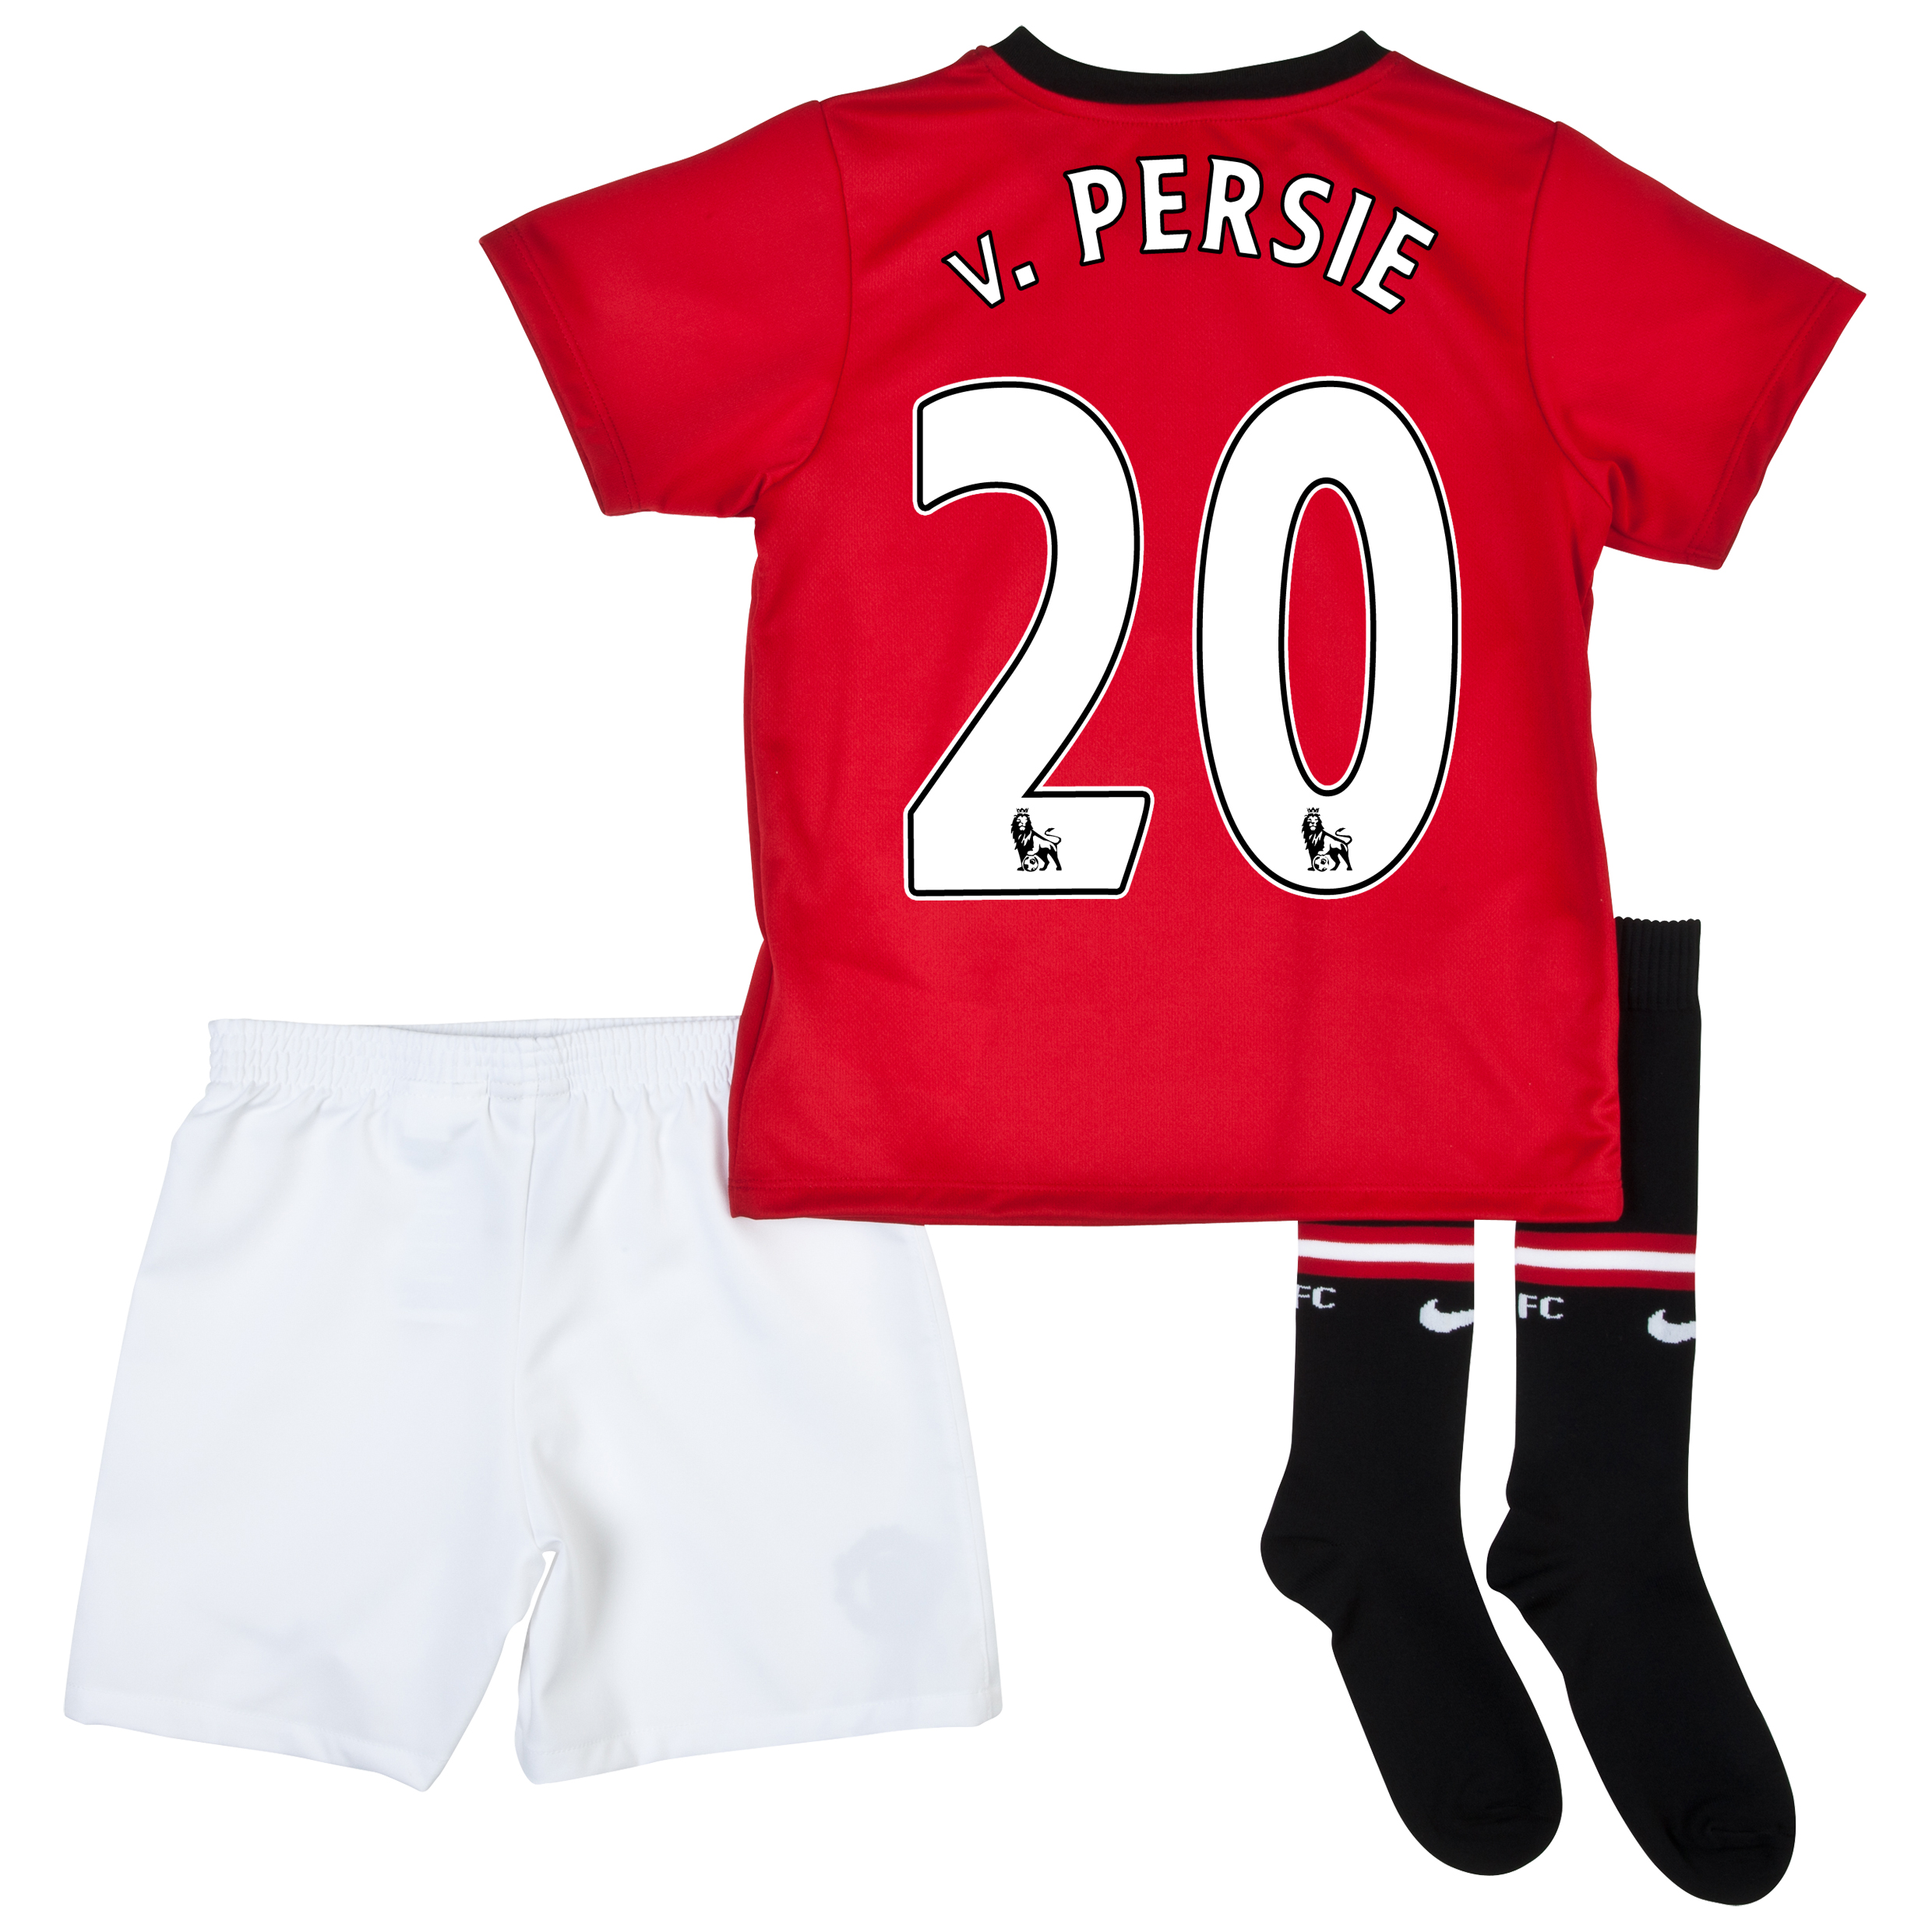 Manchester United Home Kit 2013/14 - Little Boys with v.Persie 20 printing